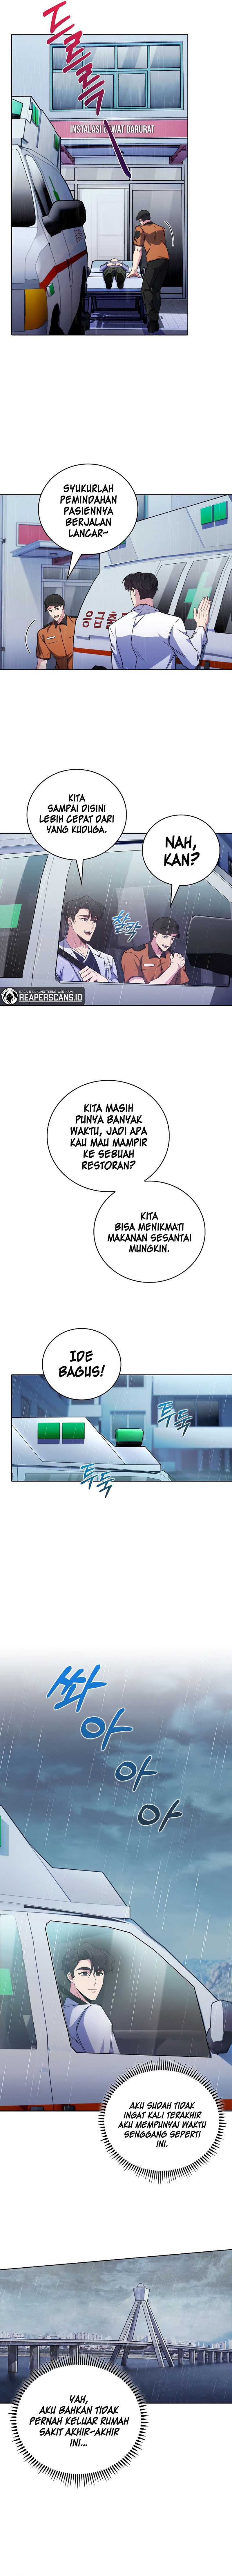 Level-up Doctor Chapter 44